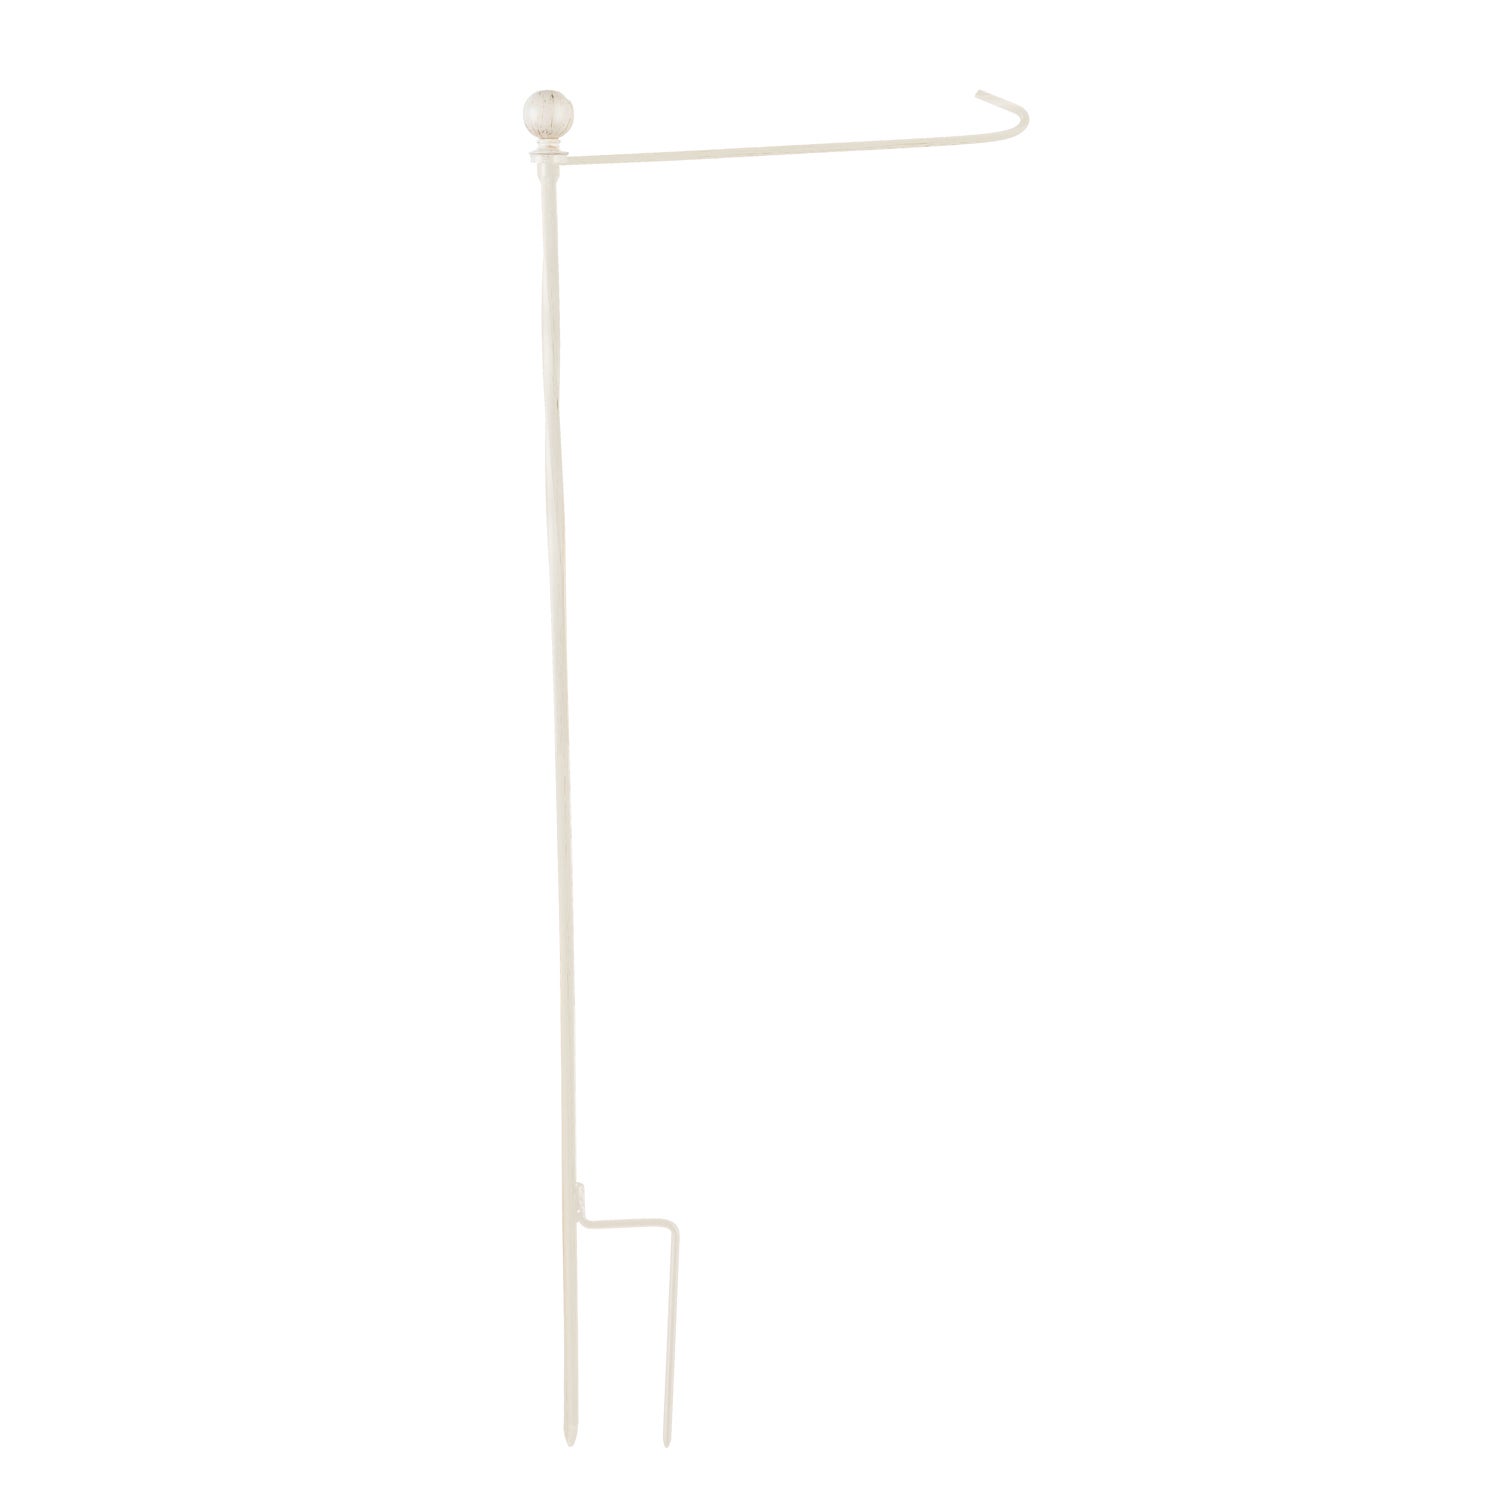 Metal Twist Garden Flag Stand, Brushed Ivory Finish